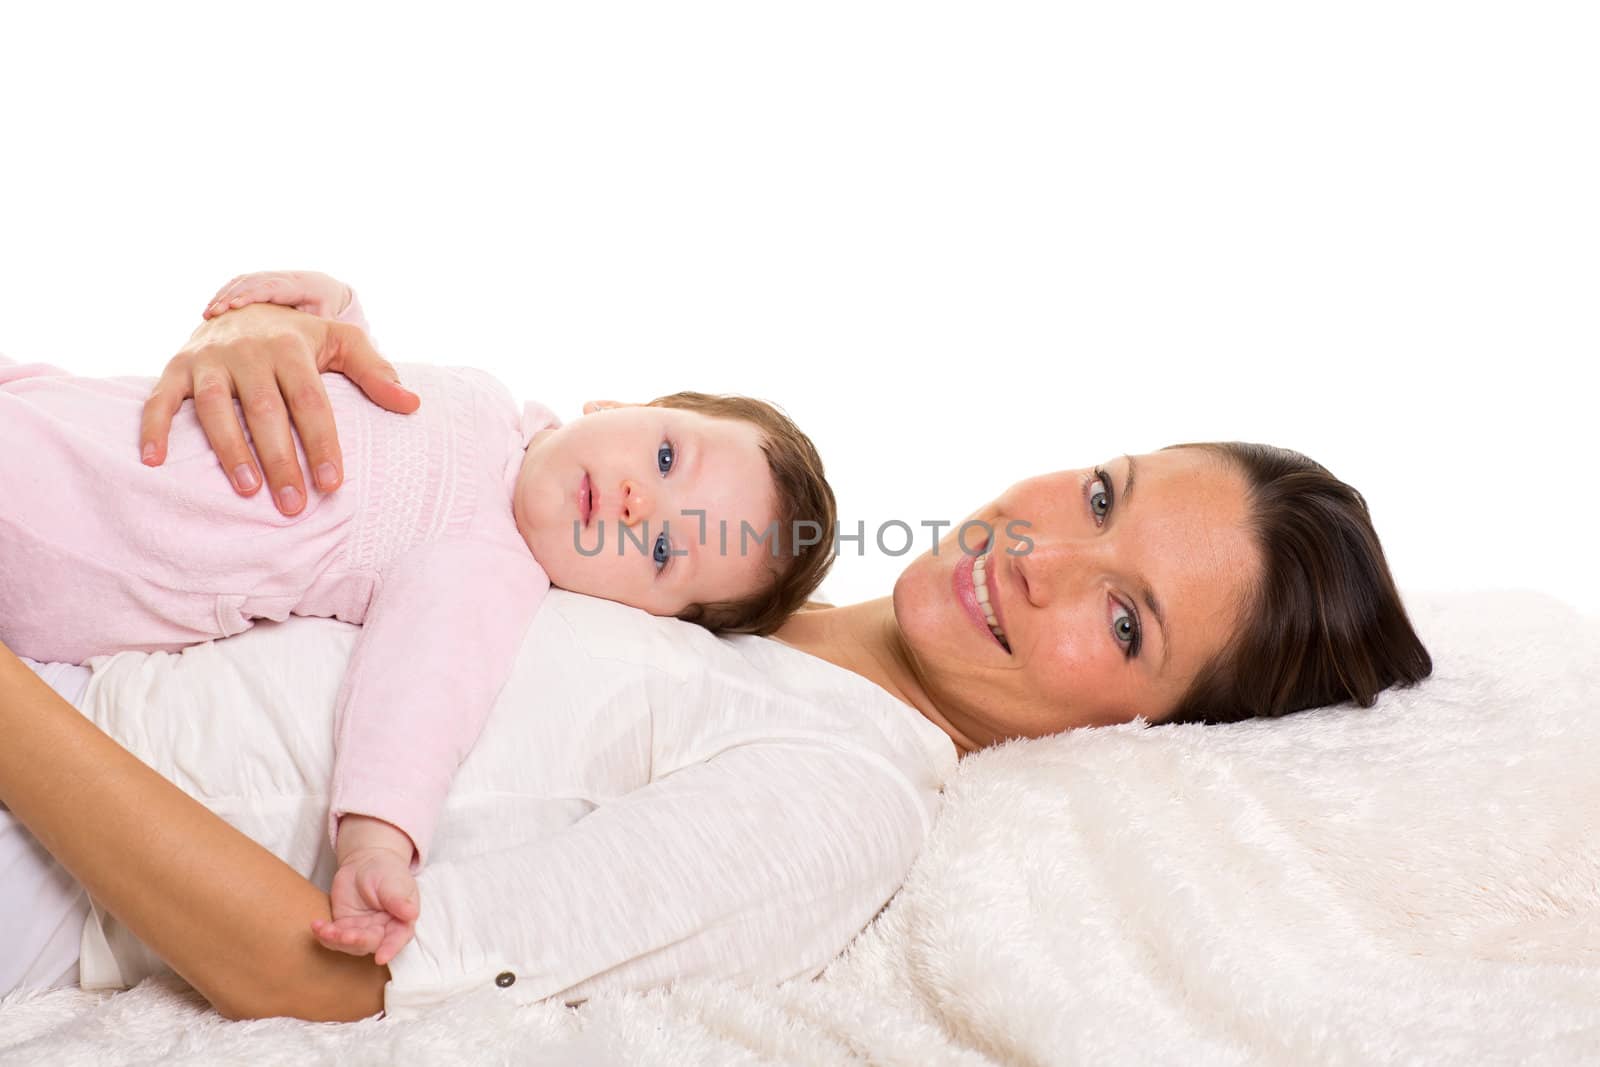 Baby girl and mother lying happy together on white fur blanket